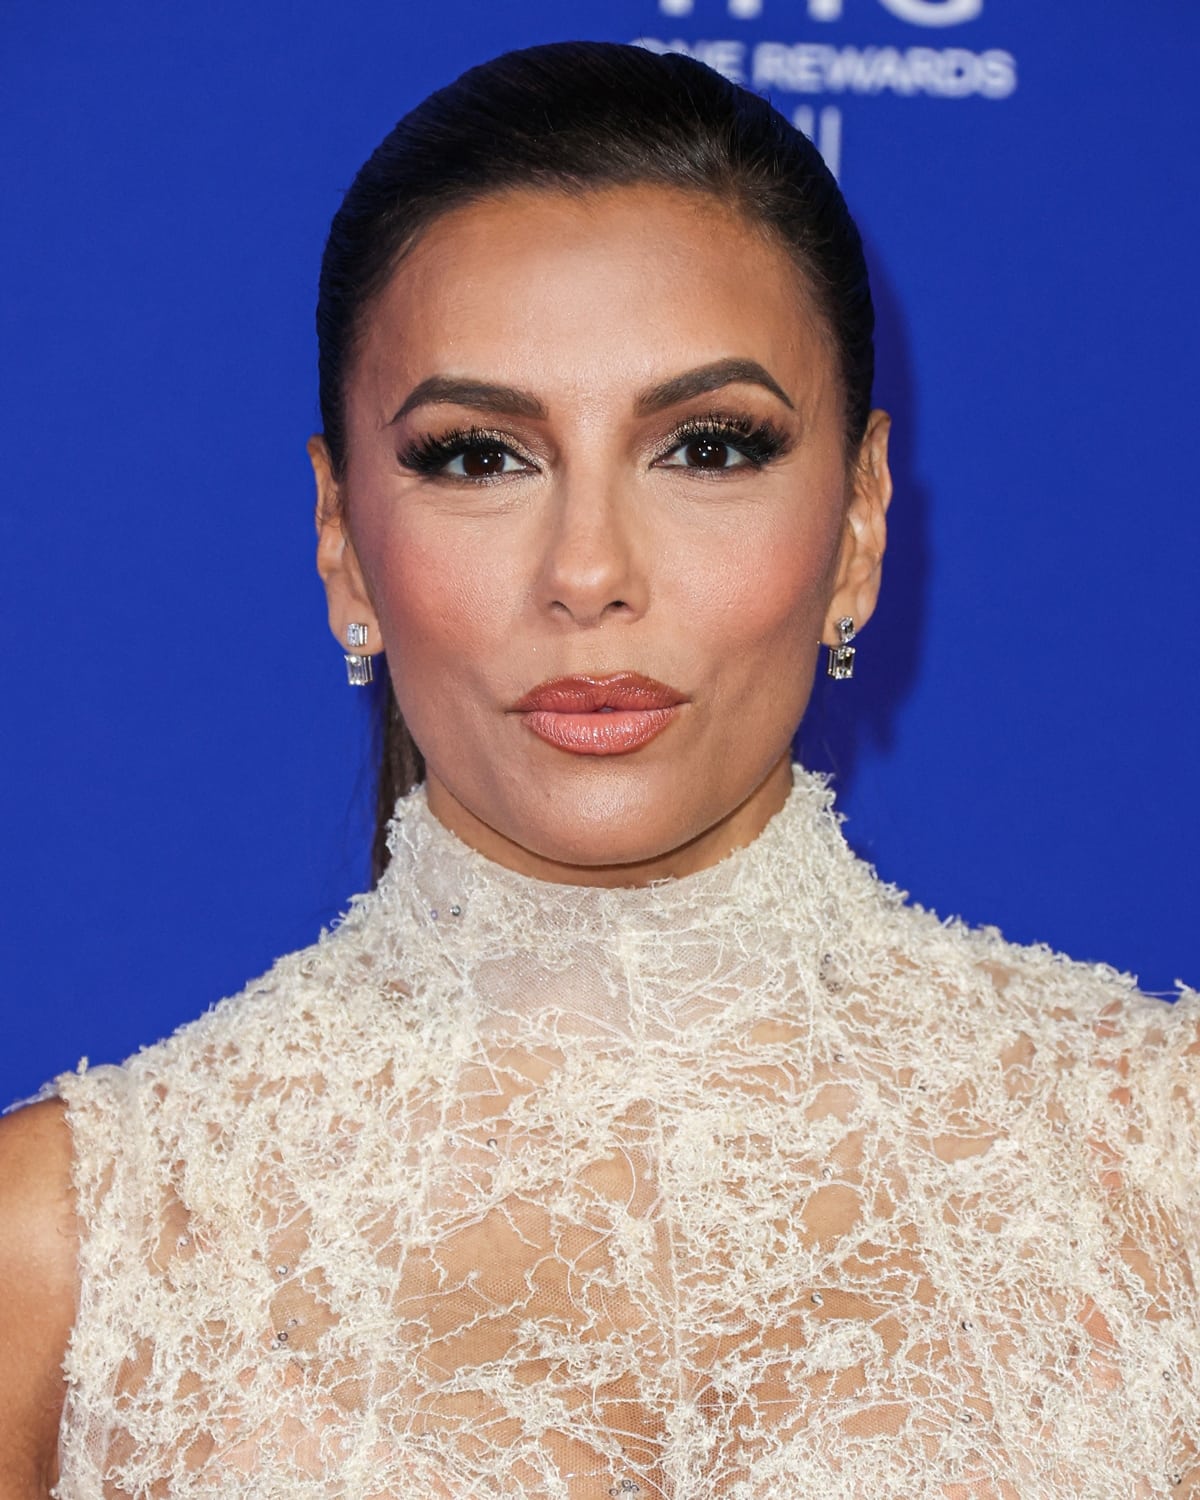 Glamour redefined: Eva Longoria's sleek low ponytail, silver eyeshadow, and glossy pink lip add the perfect finishing touches, embodying timeless beauty at the Palm Springs International Film Festival